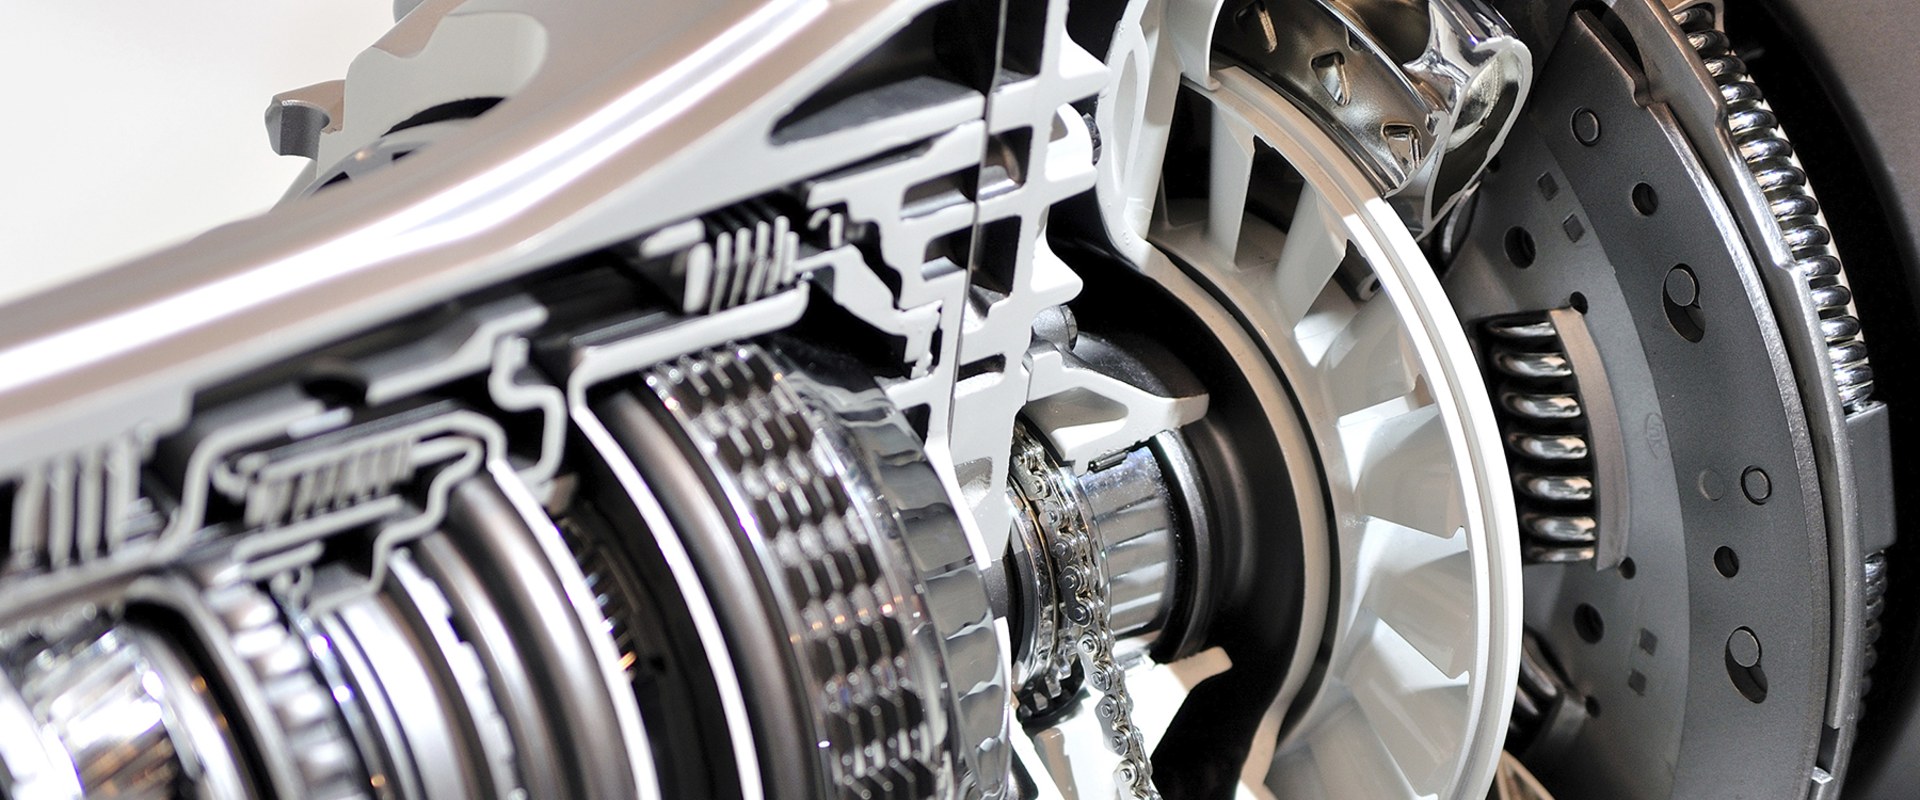 Is Your Car in Need of Clutch Repairs?